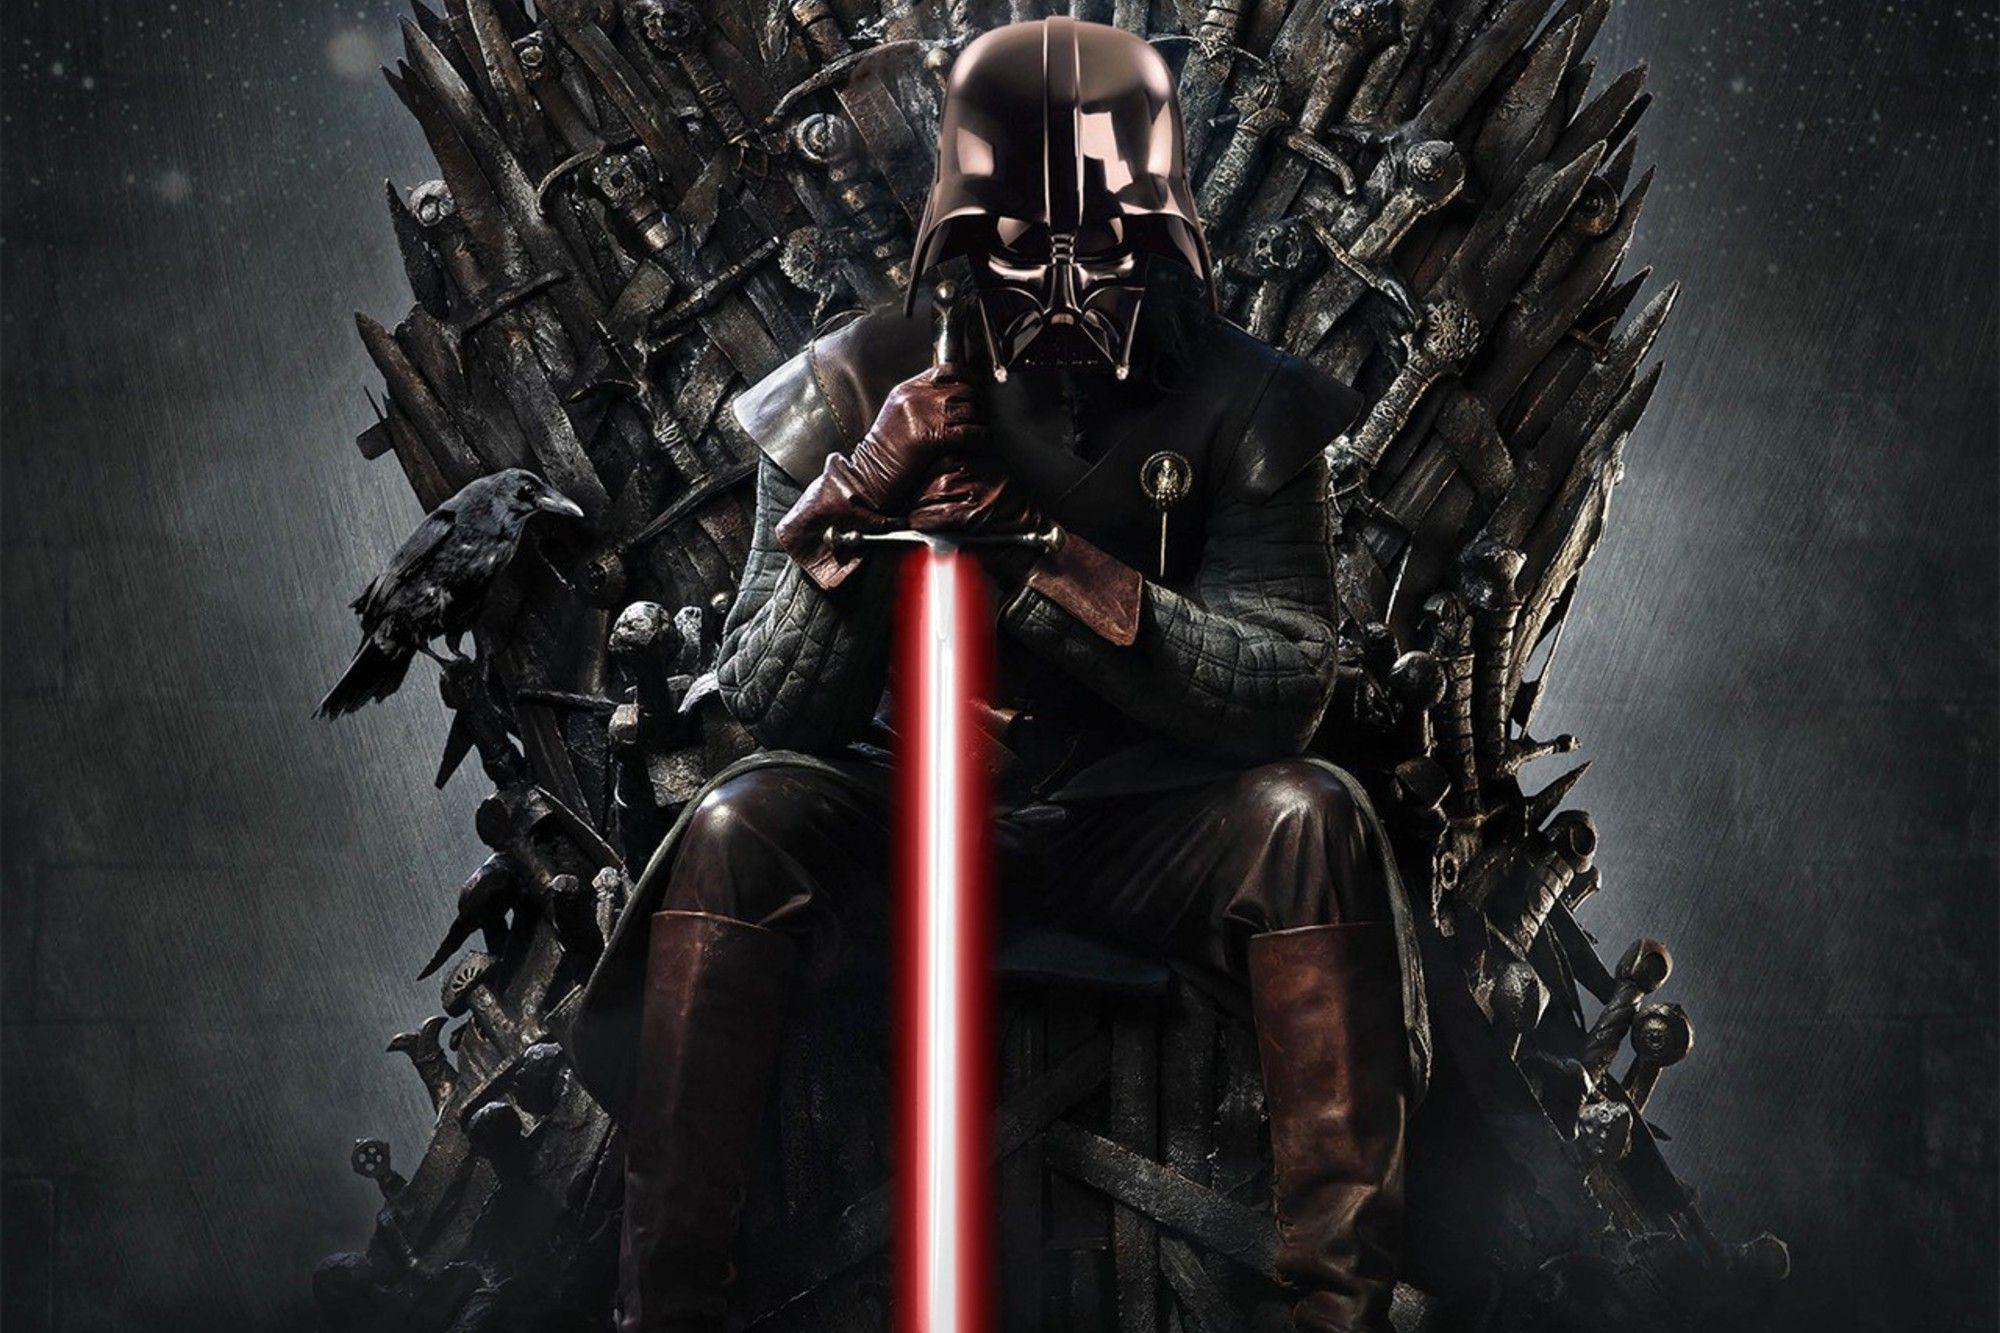 Lightsabers game of thrones iron throne clones wallpaper